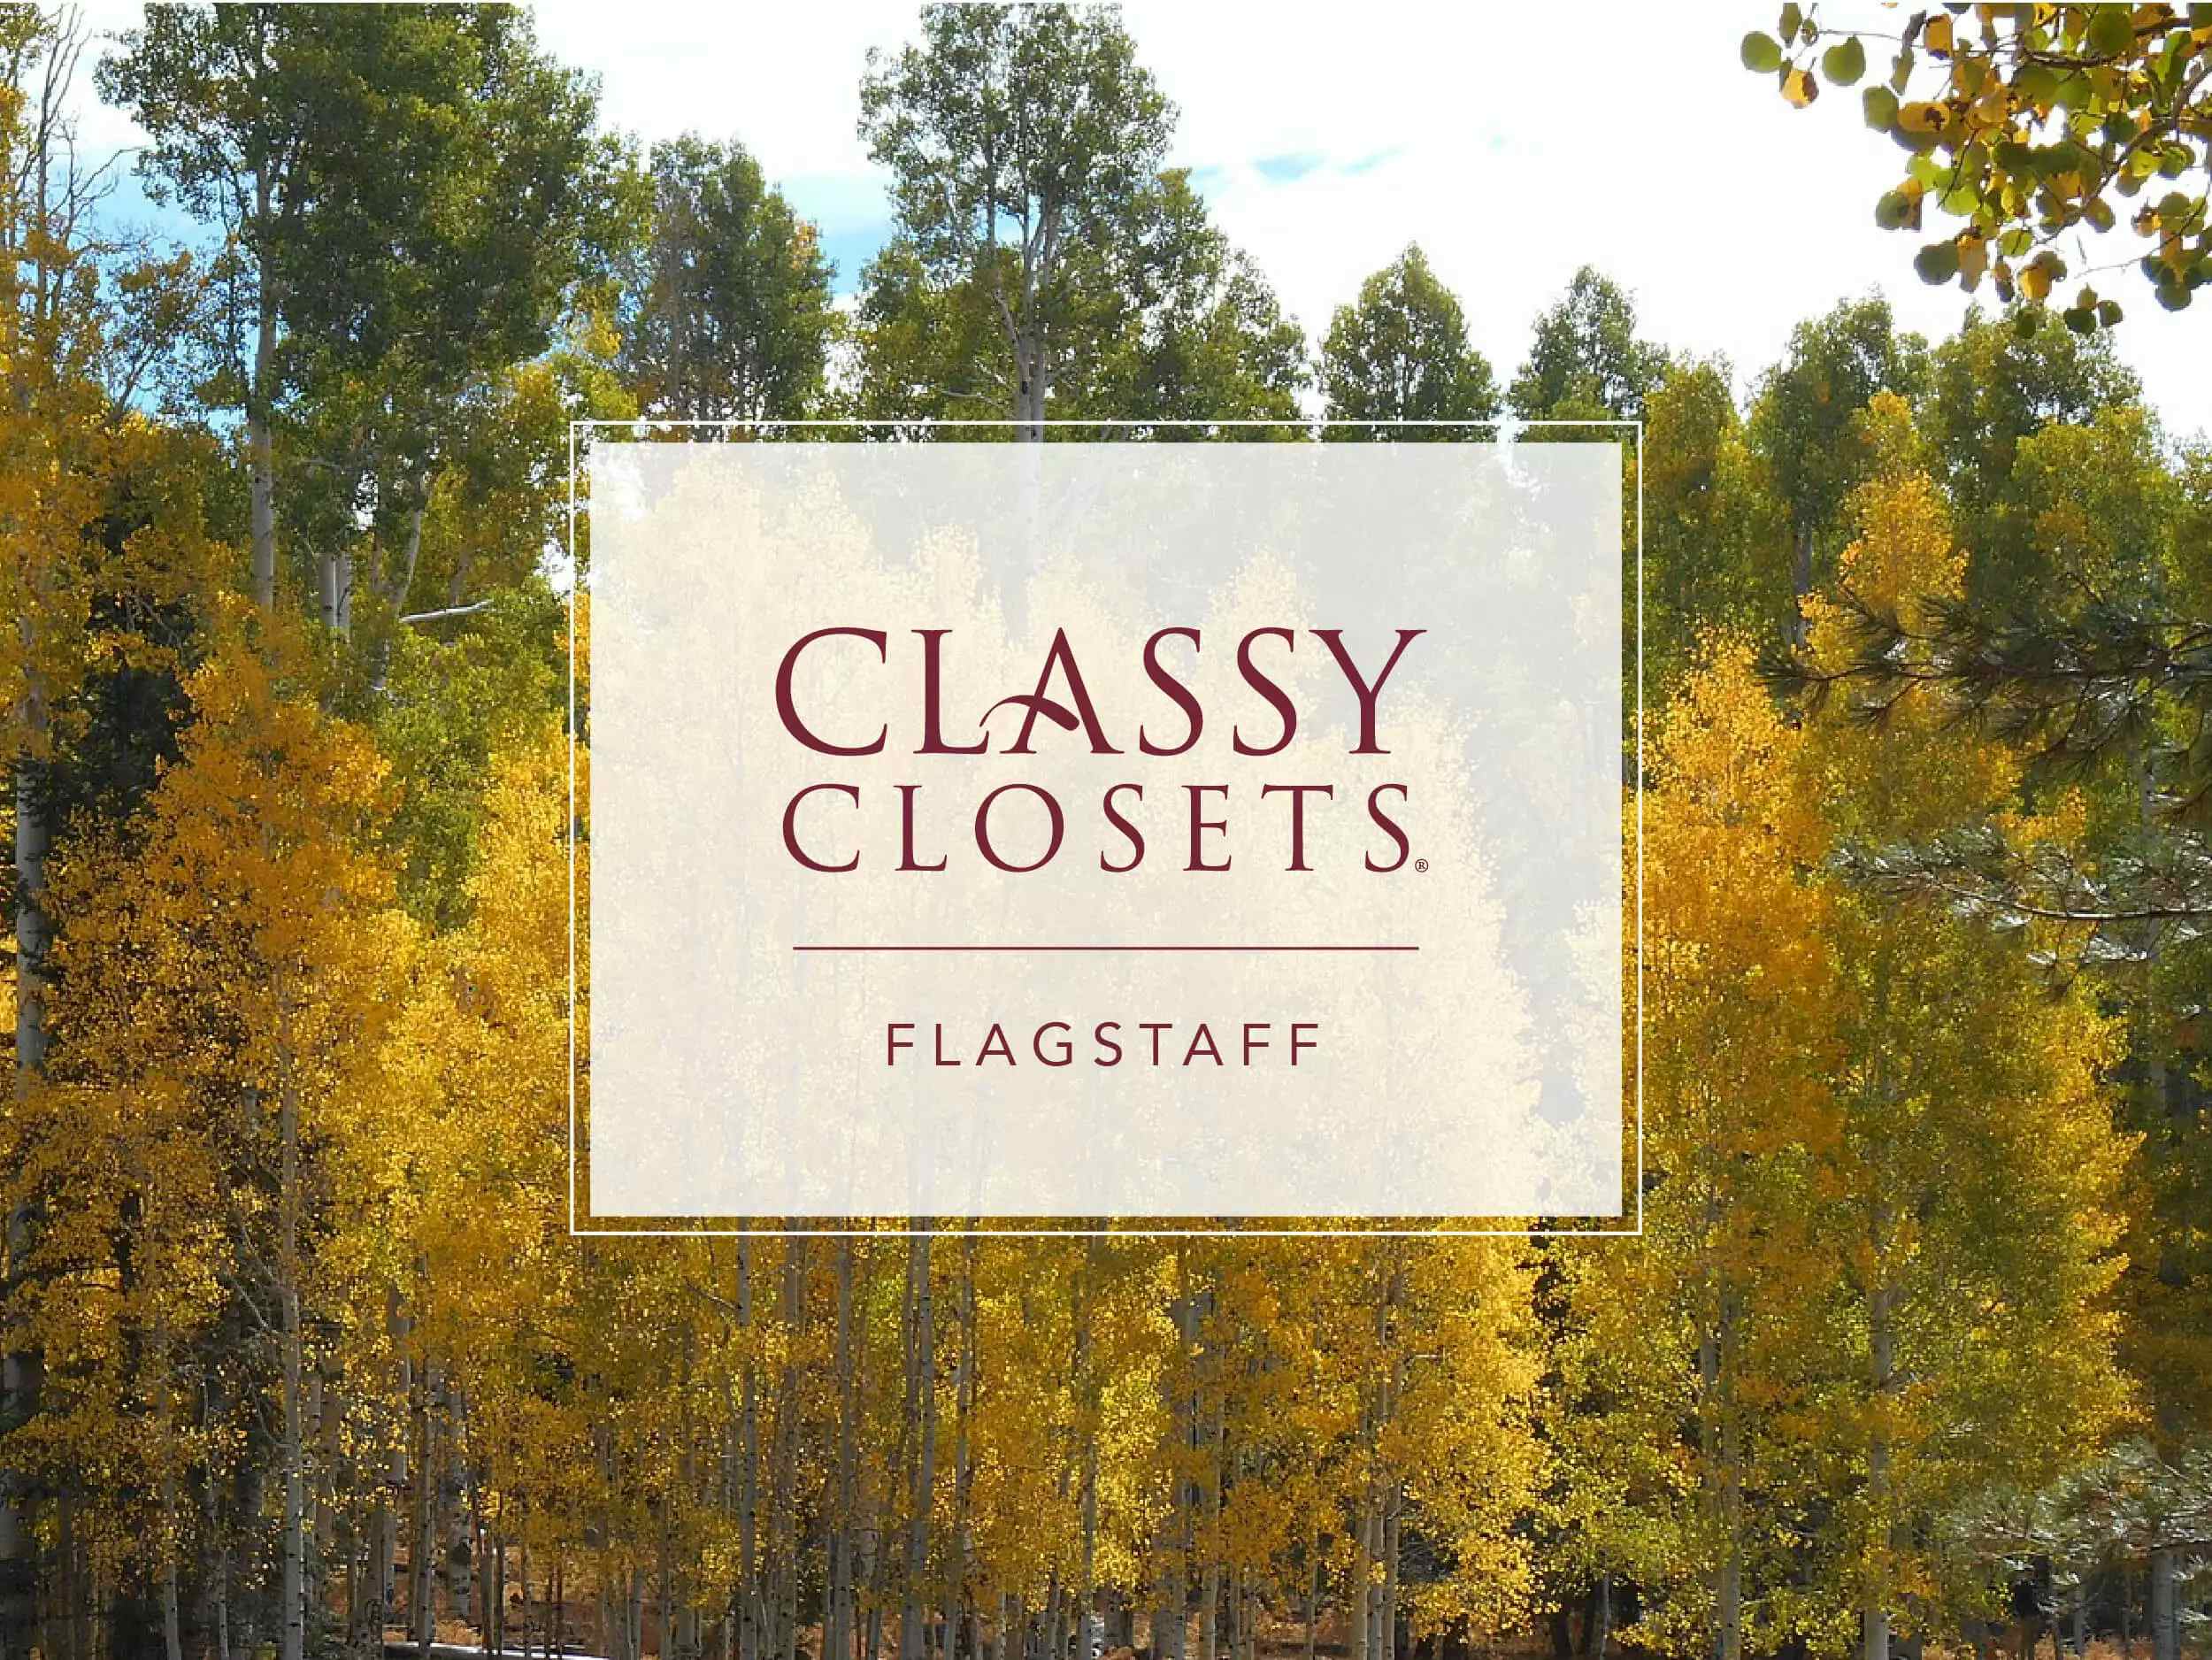 showroom on the location page-/images/locations/Flagstaff.webp